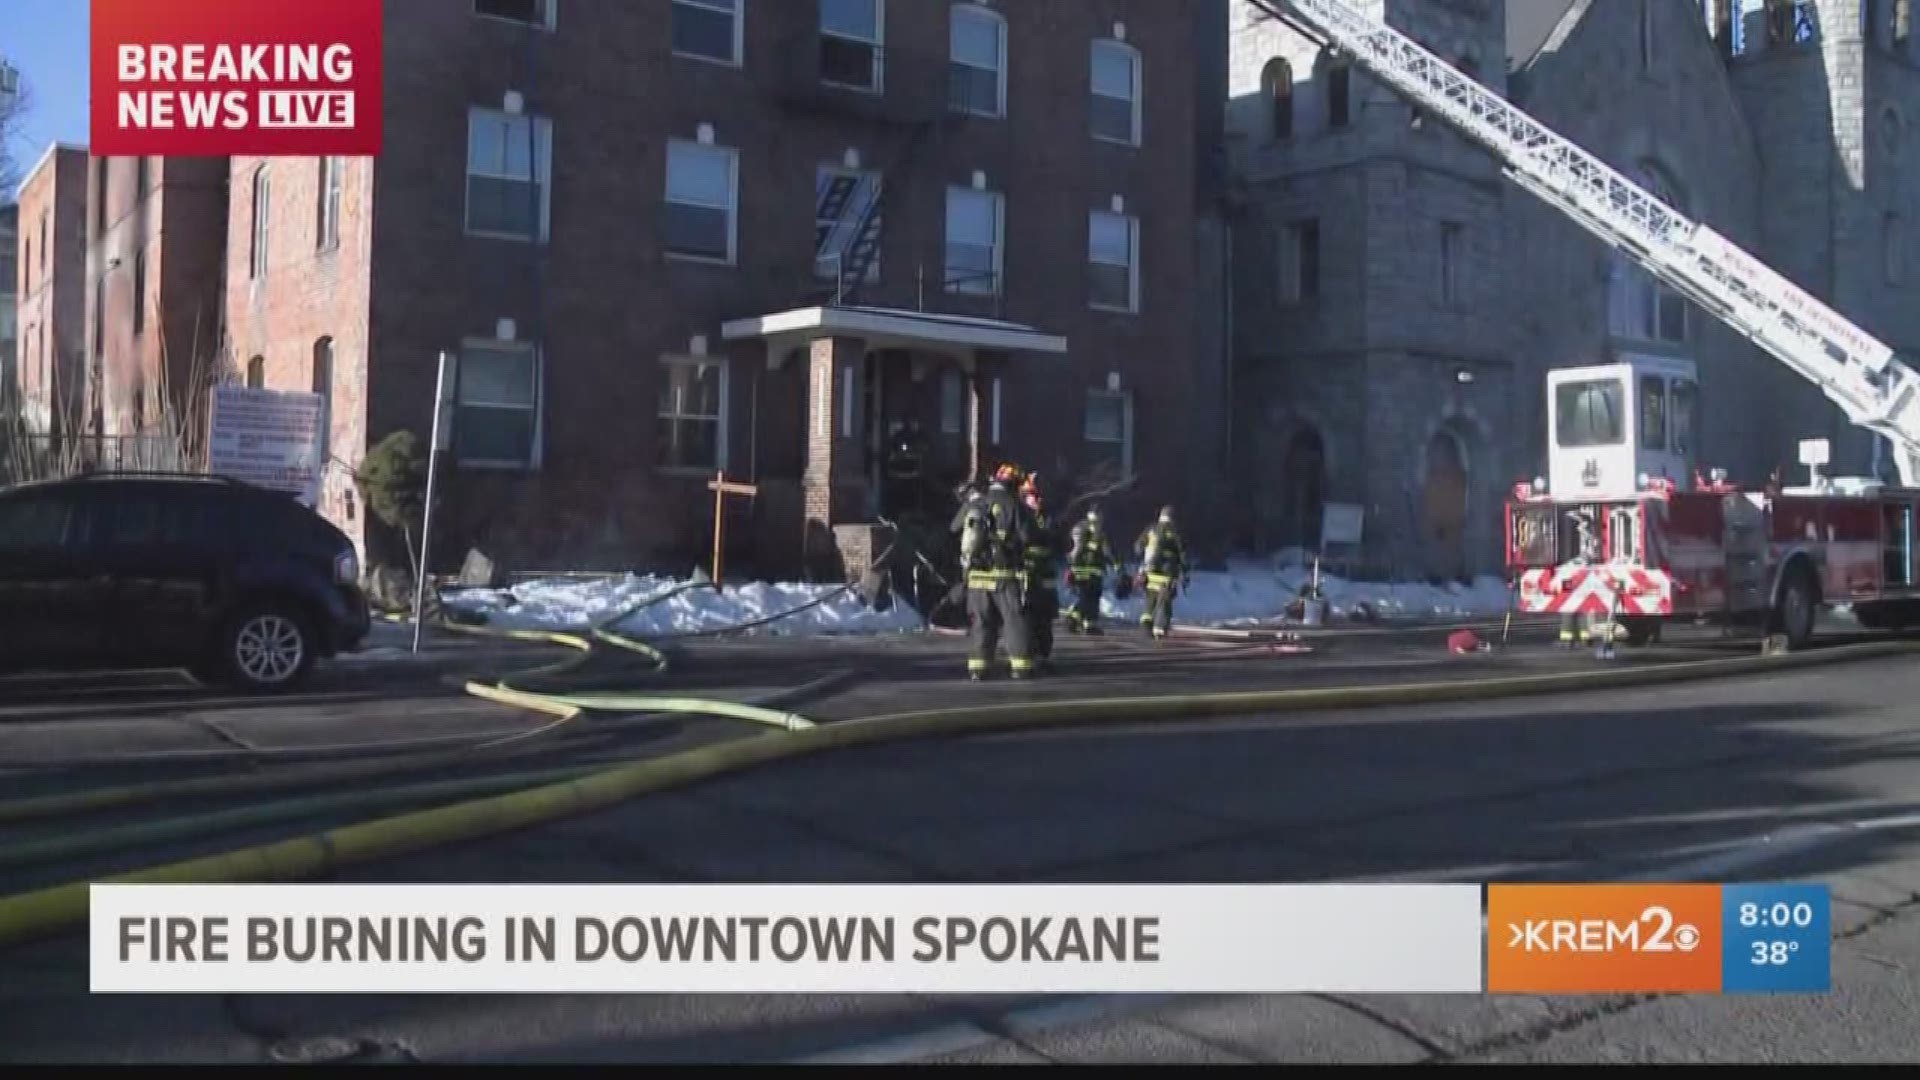 Between 50 and 60 firefighters responded to the fire at 4th Avenue and Bernard Street in downtown Spokane on Wednesday morning.